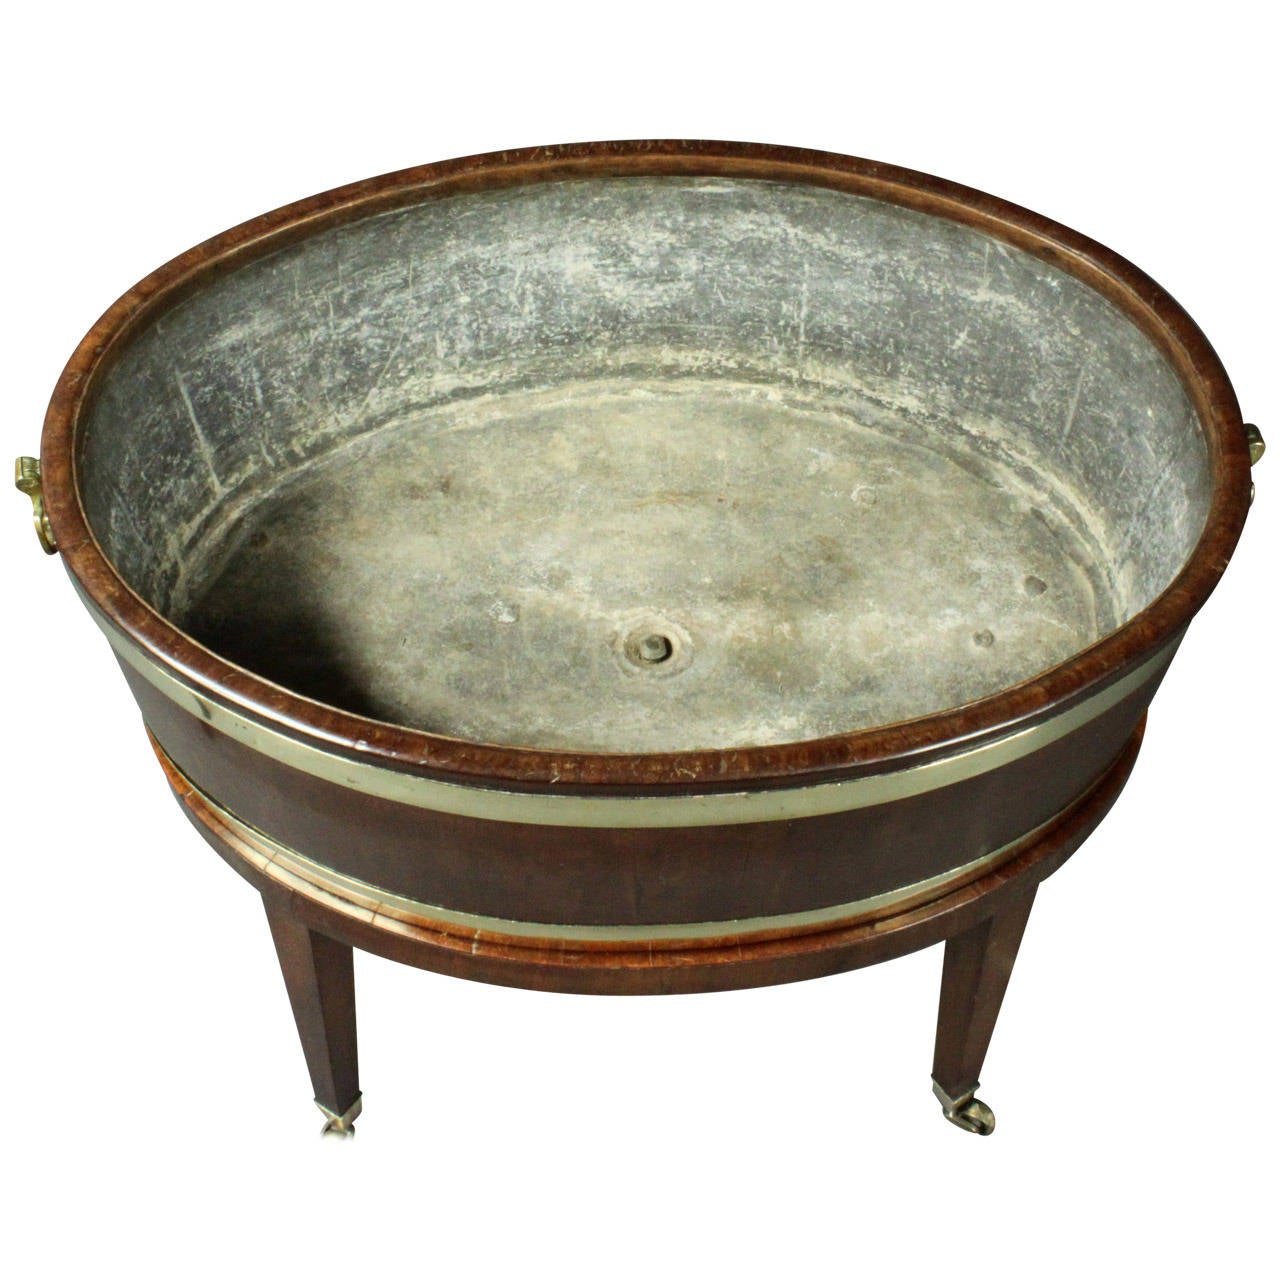 A late 18th Century oval mahogany brass-bound open wine cooler with its original lead lining and plug and on its original stand